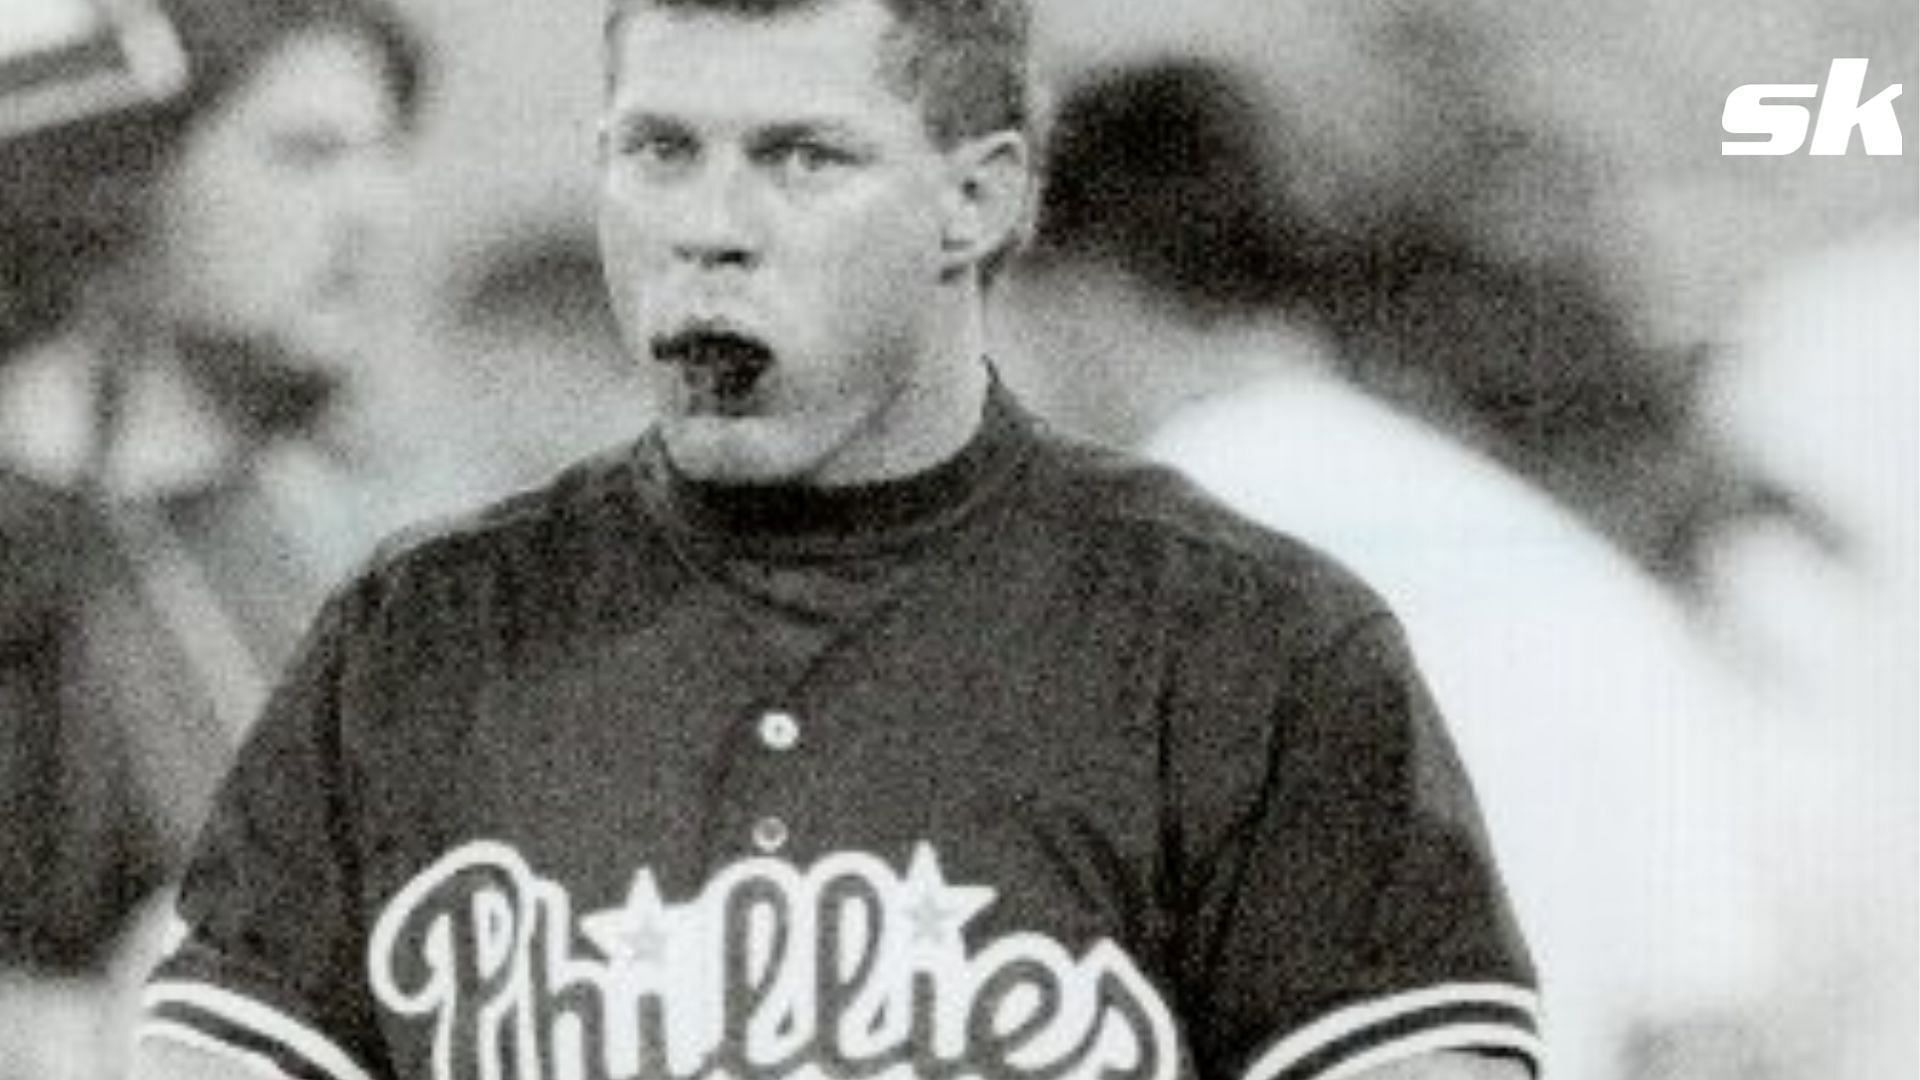 MLB legend Lenny Dykstra once revealed he used to add steroids to his cereal in order to gain an unfair advantage. Photo Credit: Lenny Dykstra Twitter